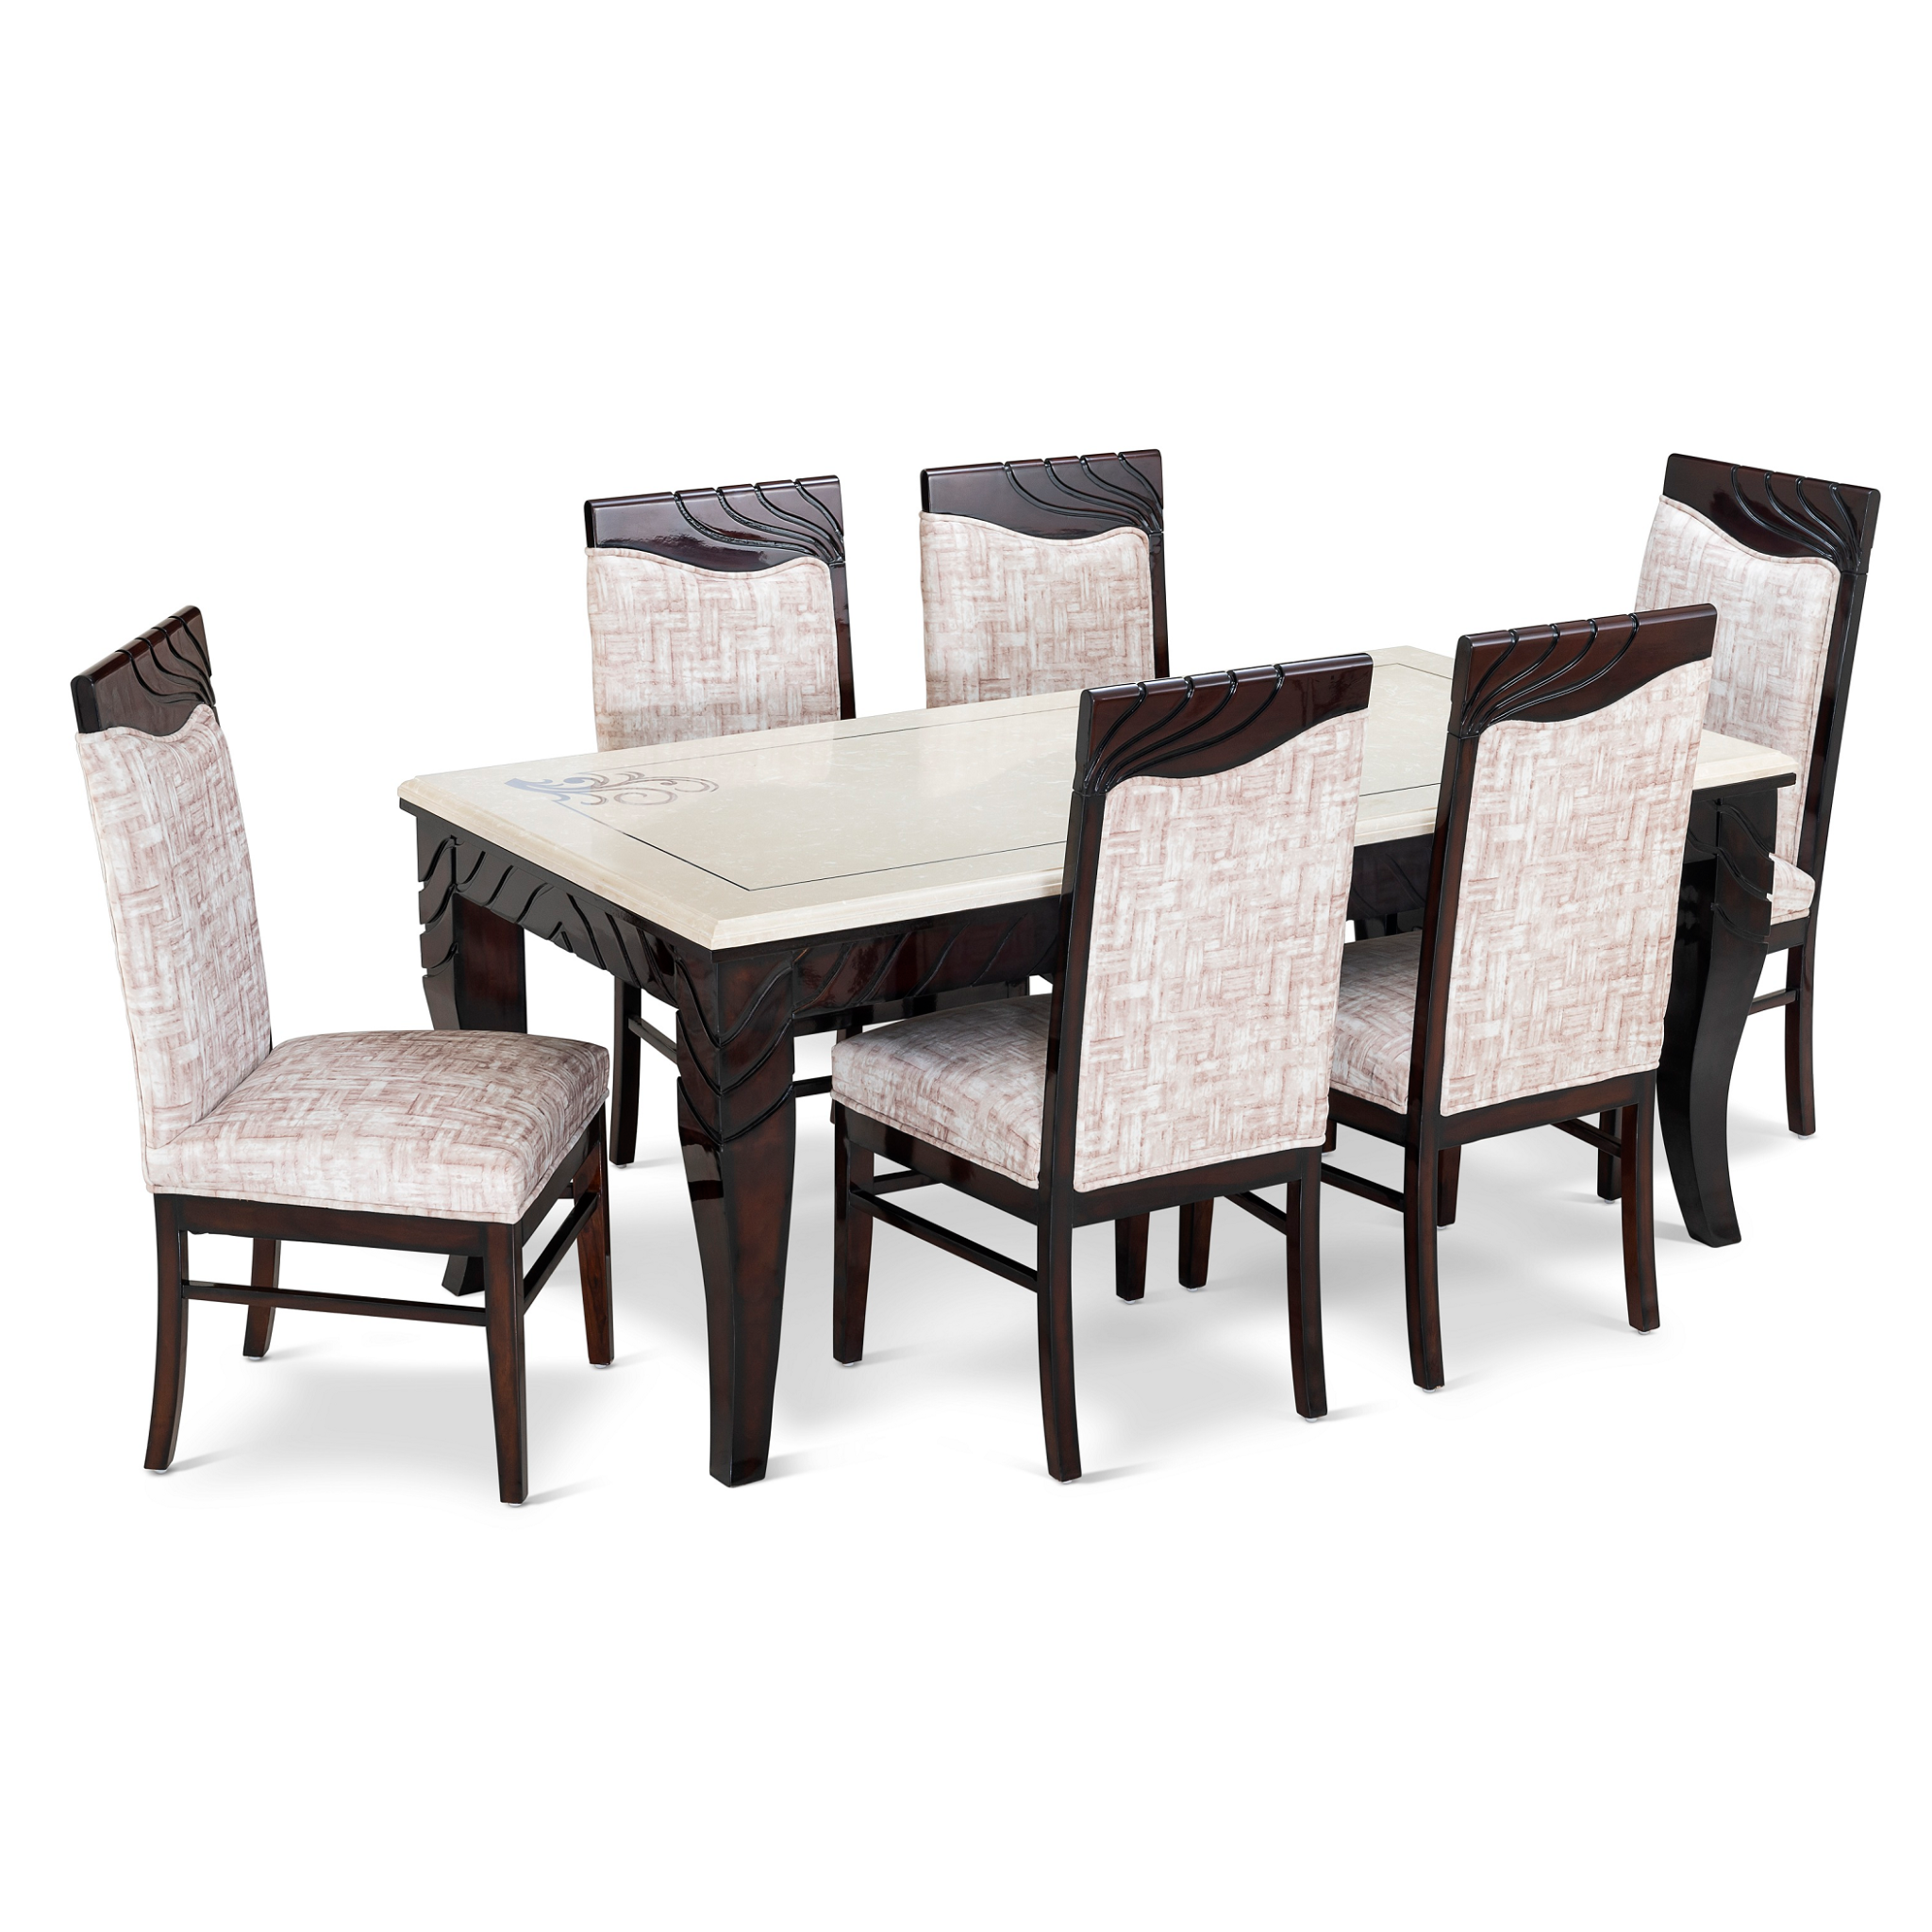 Malta Dining Table with Chair